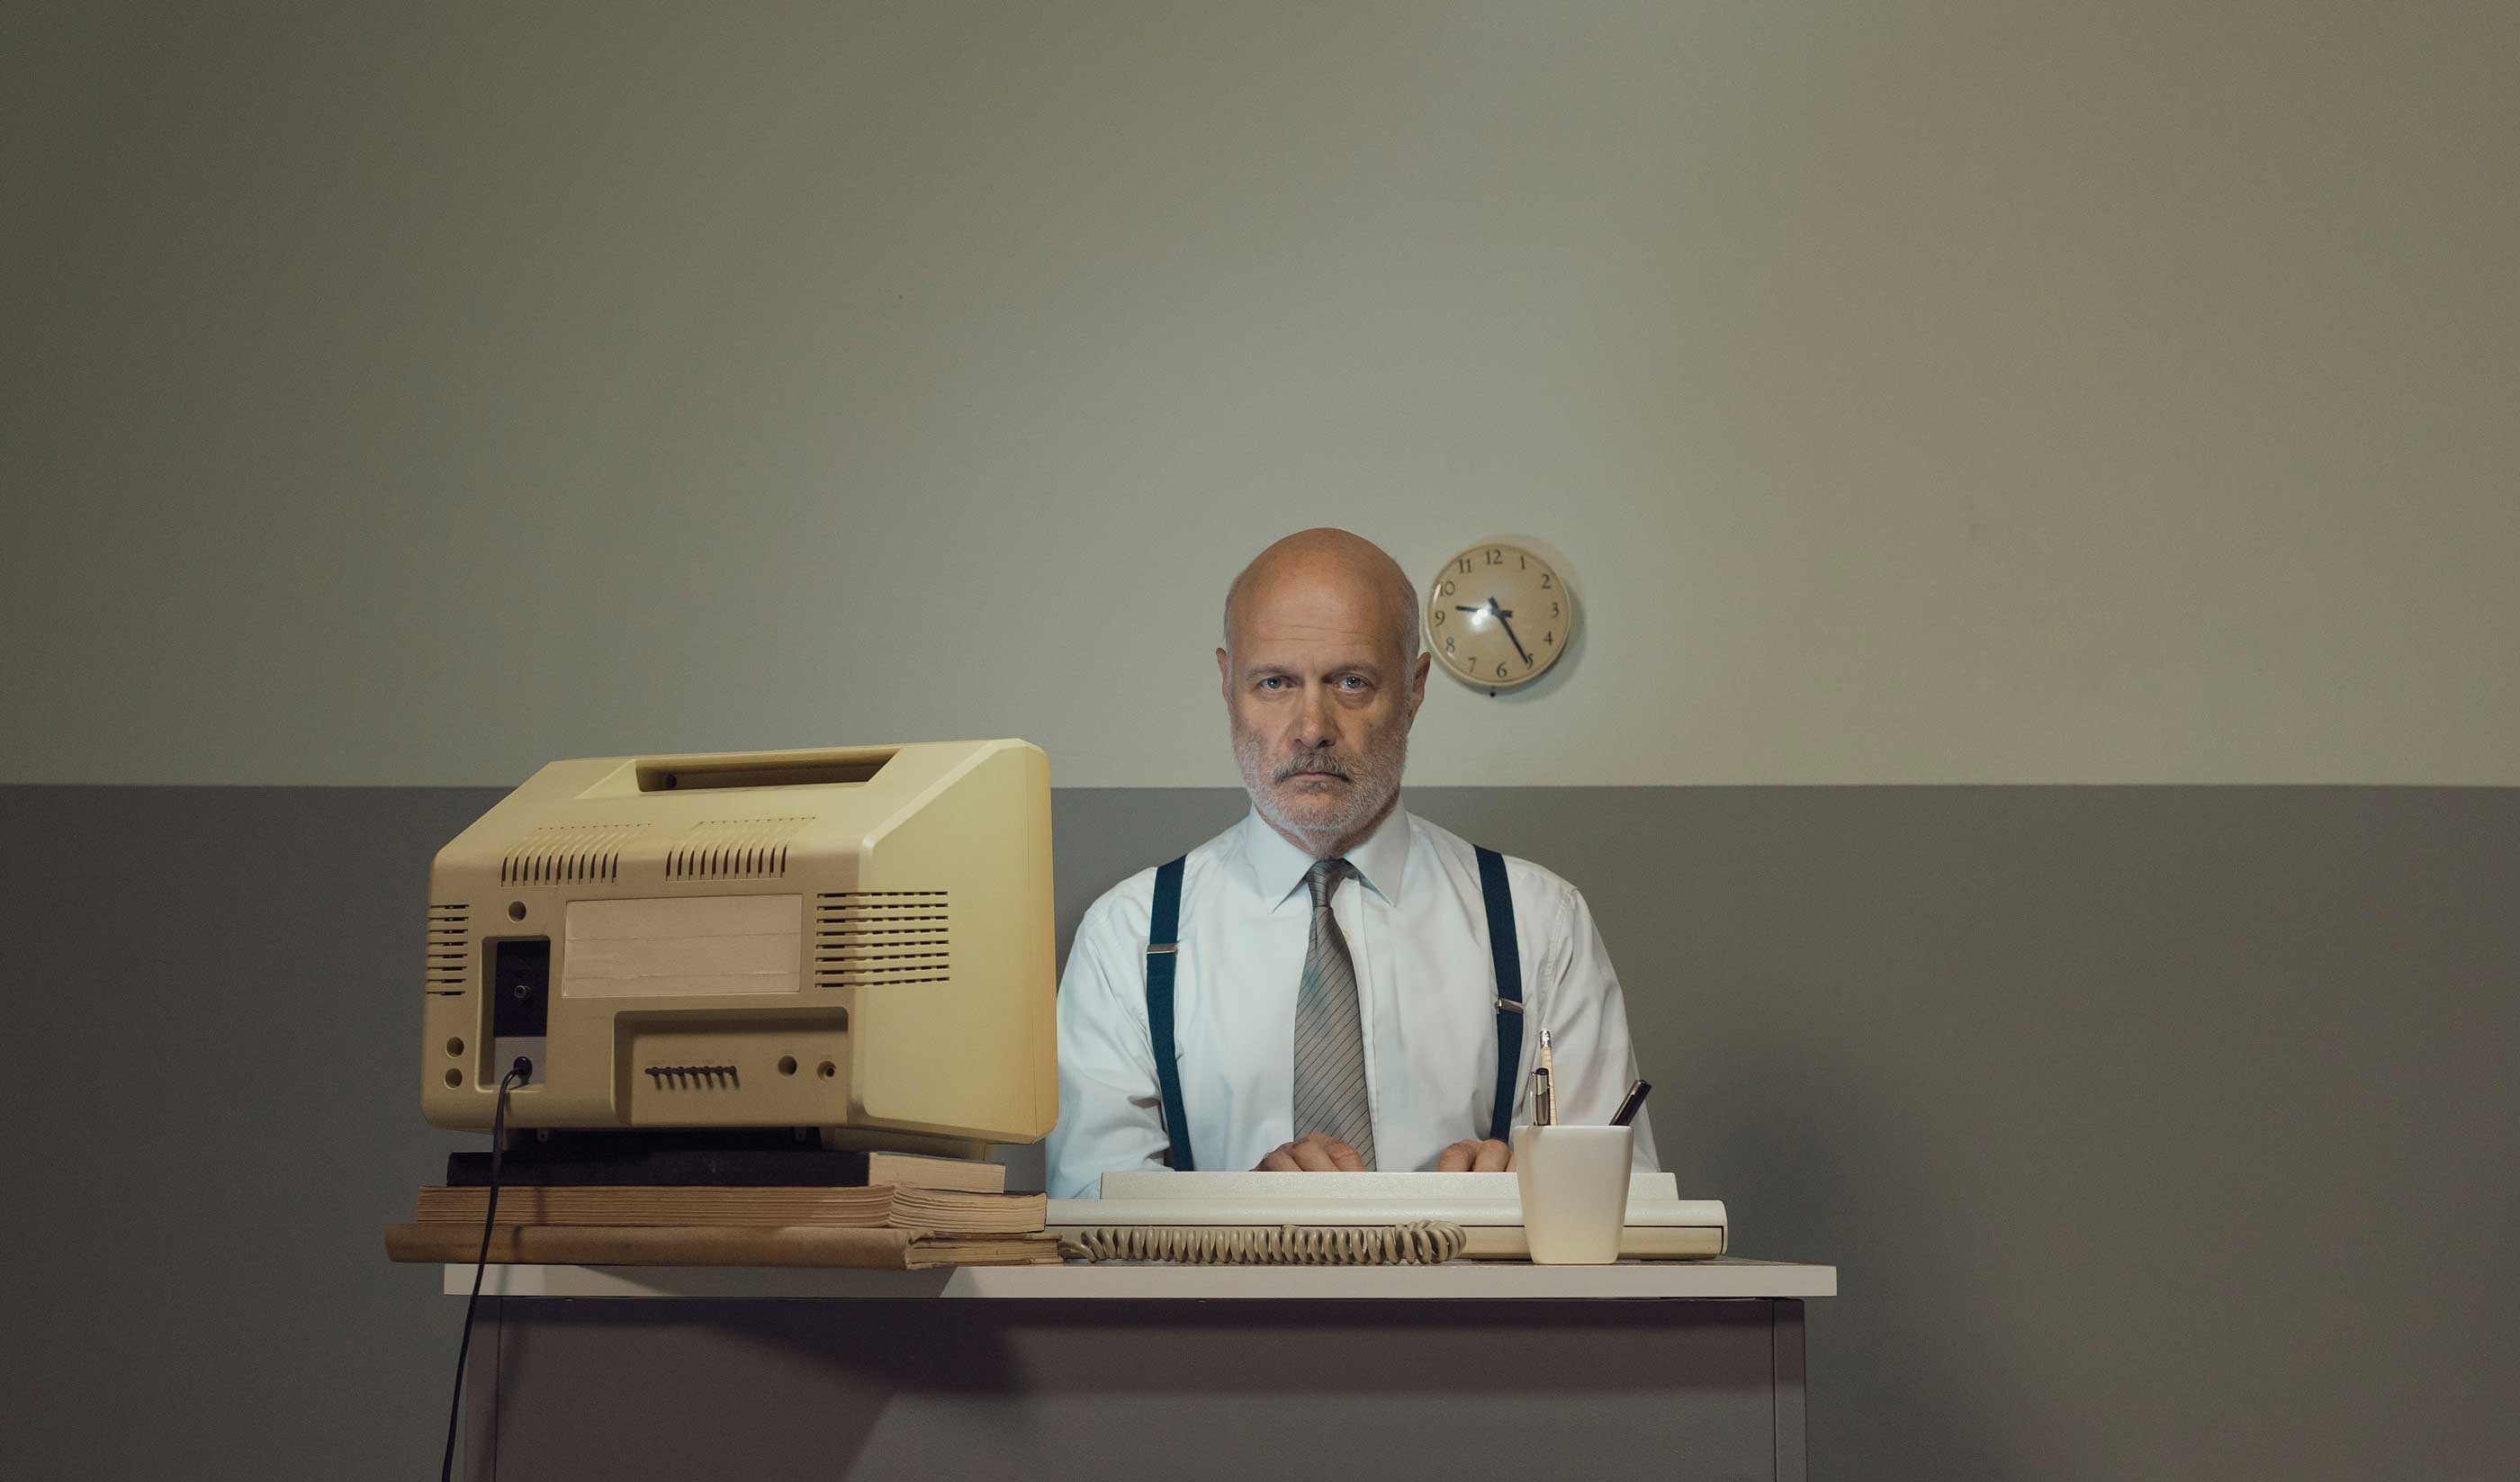 A clearly old man, both physically and fashionably, sits at an old desk with an old computer feeling old and sad.